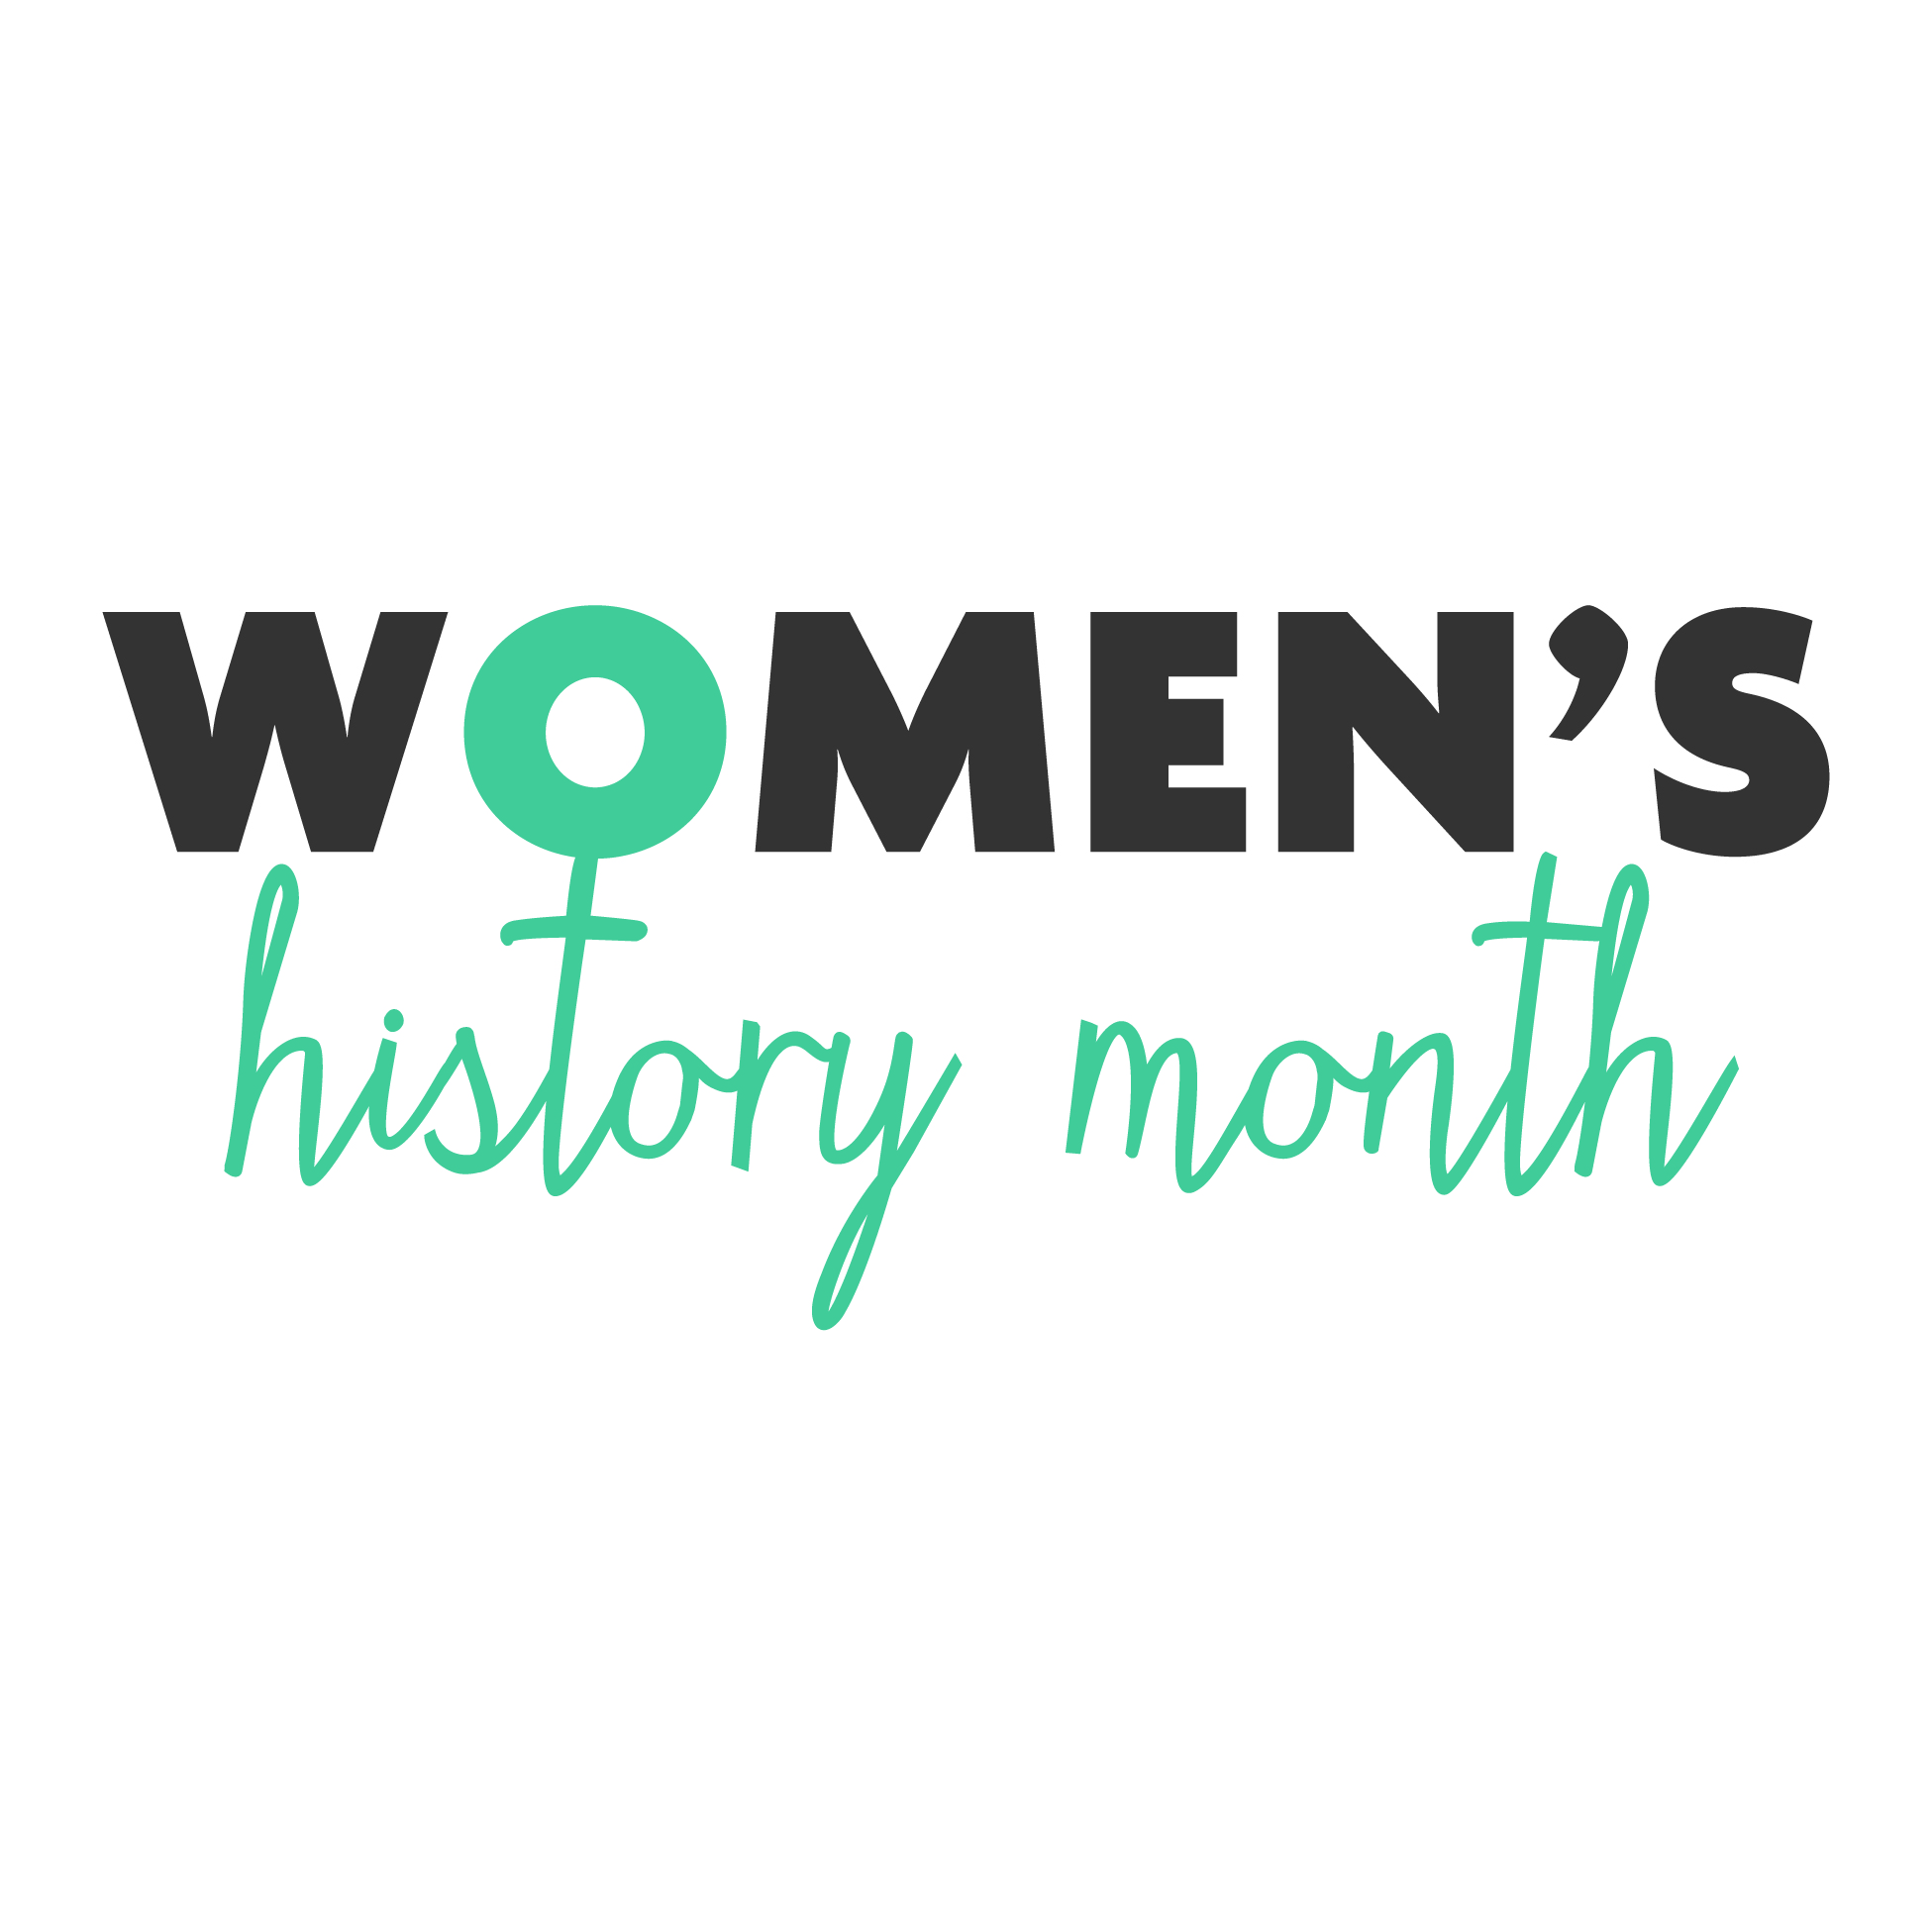  Logo used for promotional materials celebrating Women’s History Month.  LEARN MORE —&gt;  